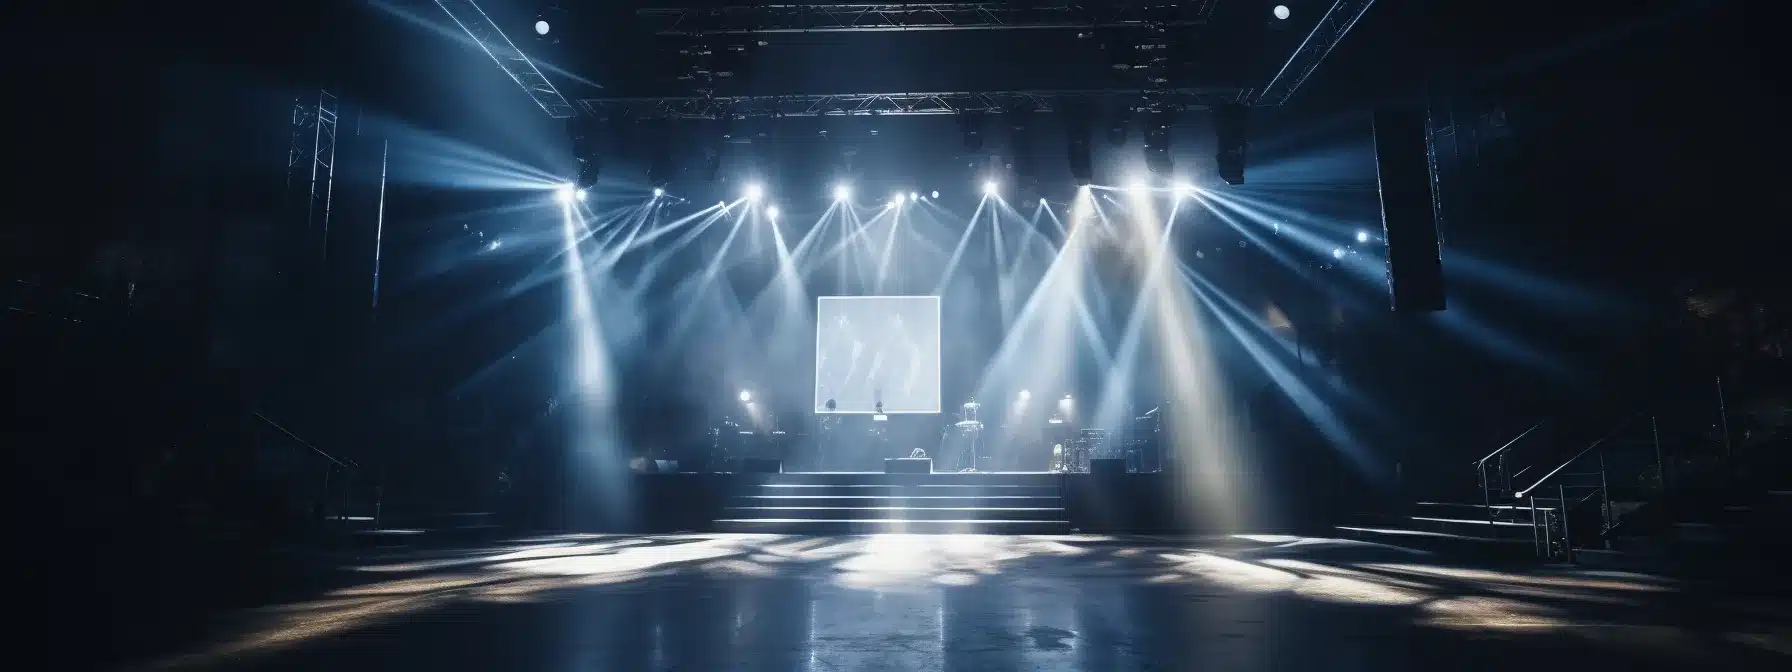 A Stage With Spotlight Shining On A Brand'S Logo, Symbolizing Their Effective Positioning Strategy.